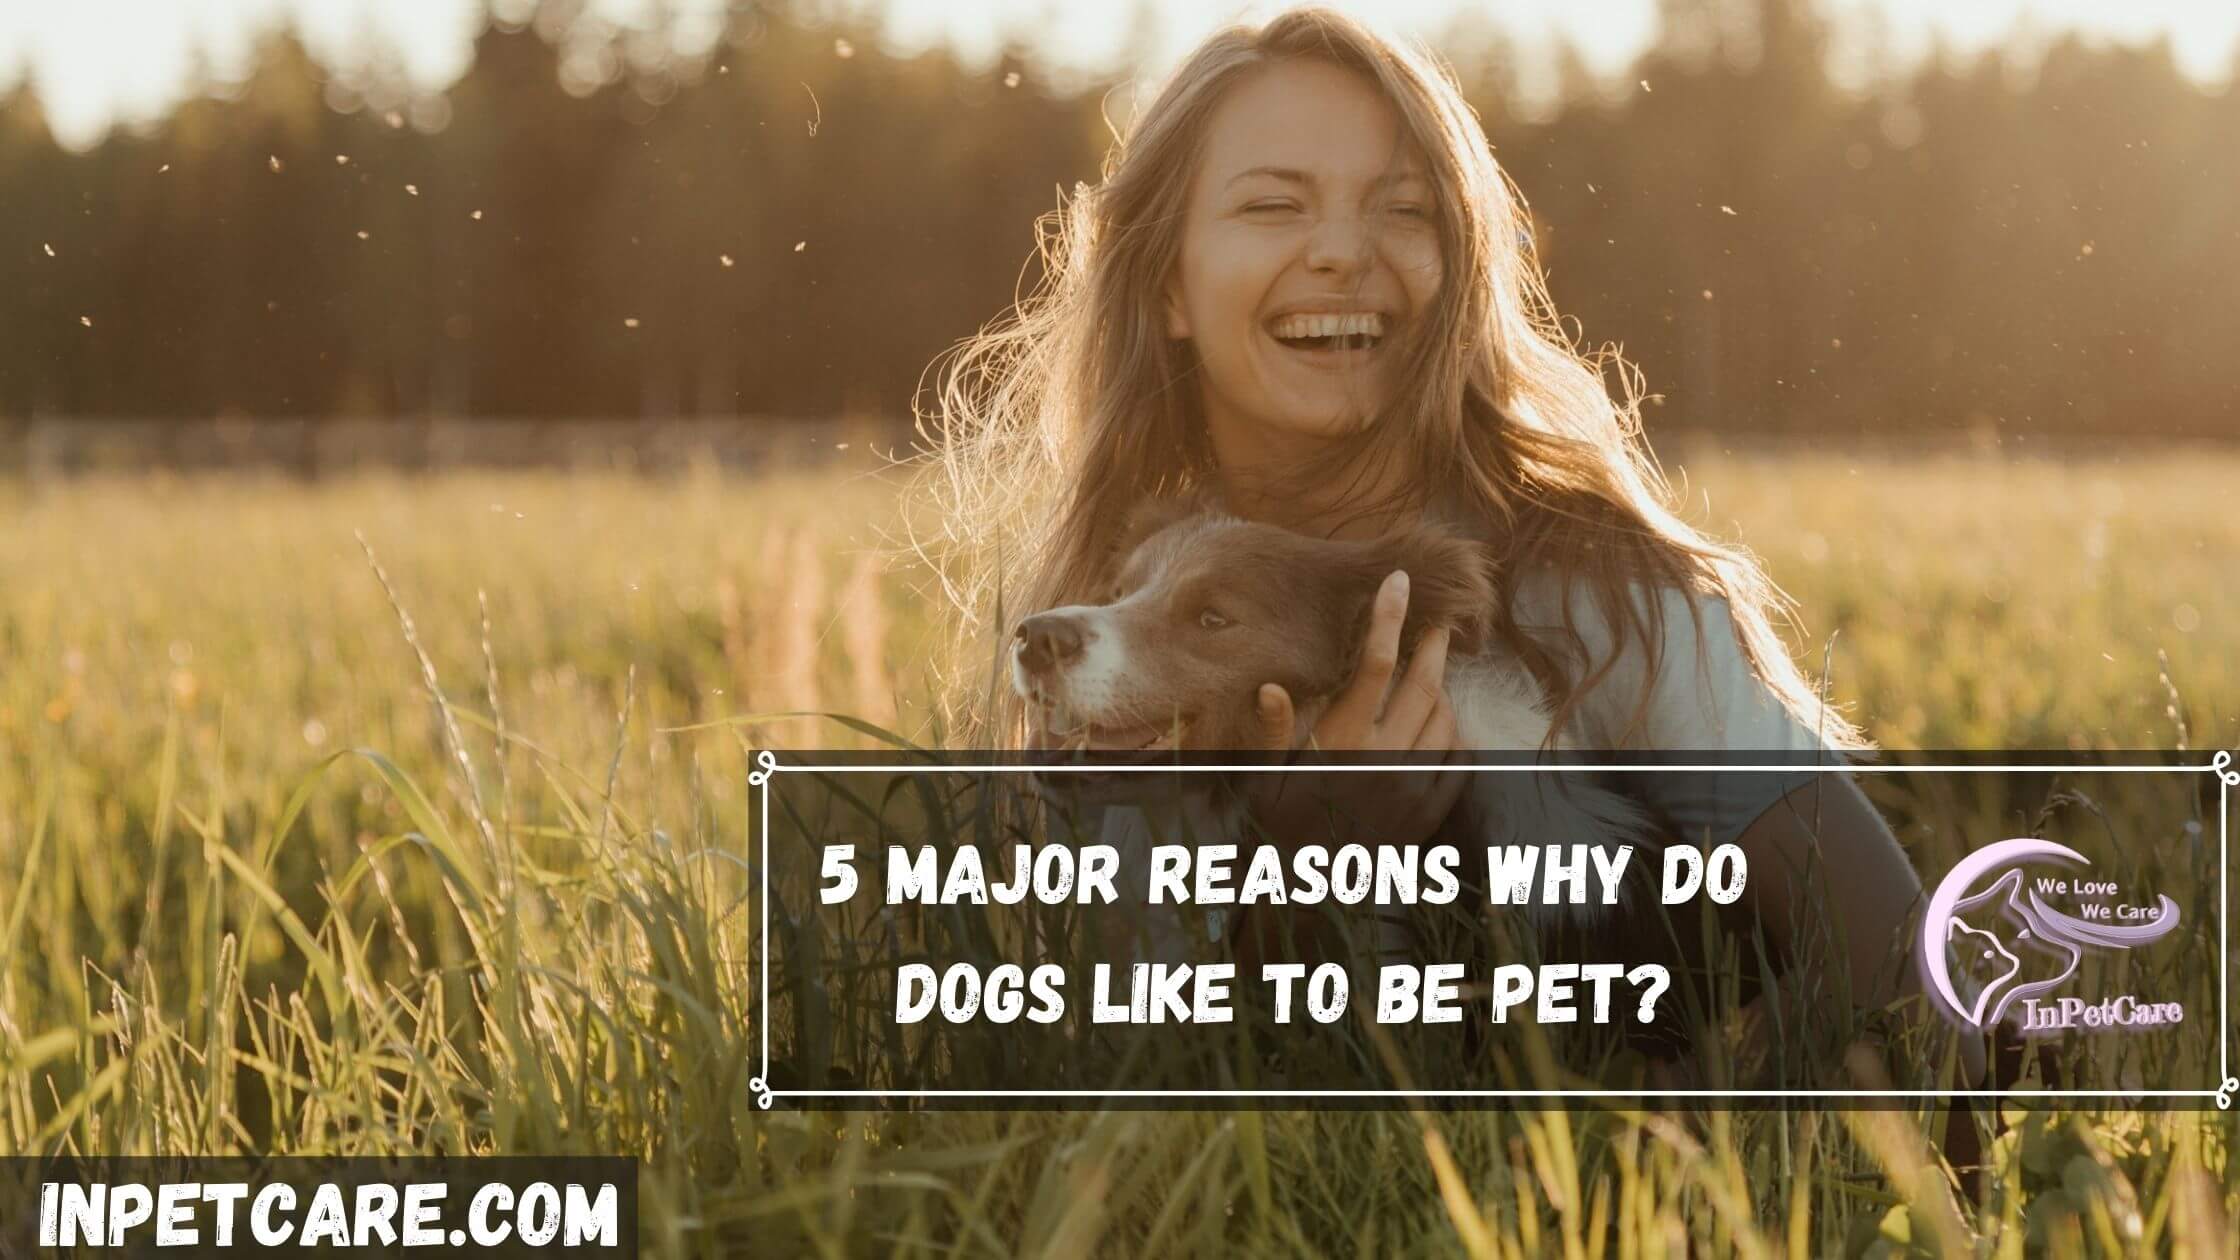 5 Major Reasons Why Do Dogs Like To Be Pet?